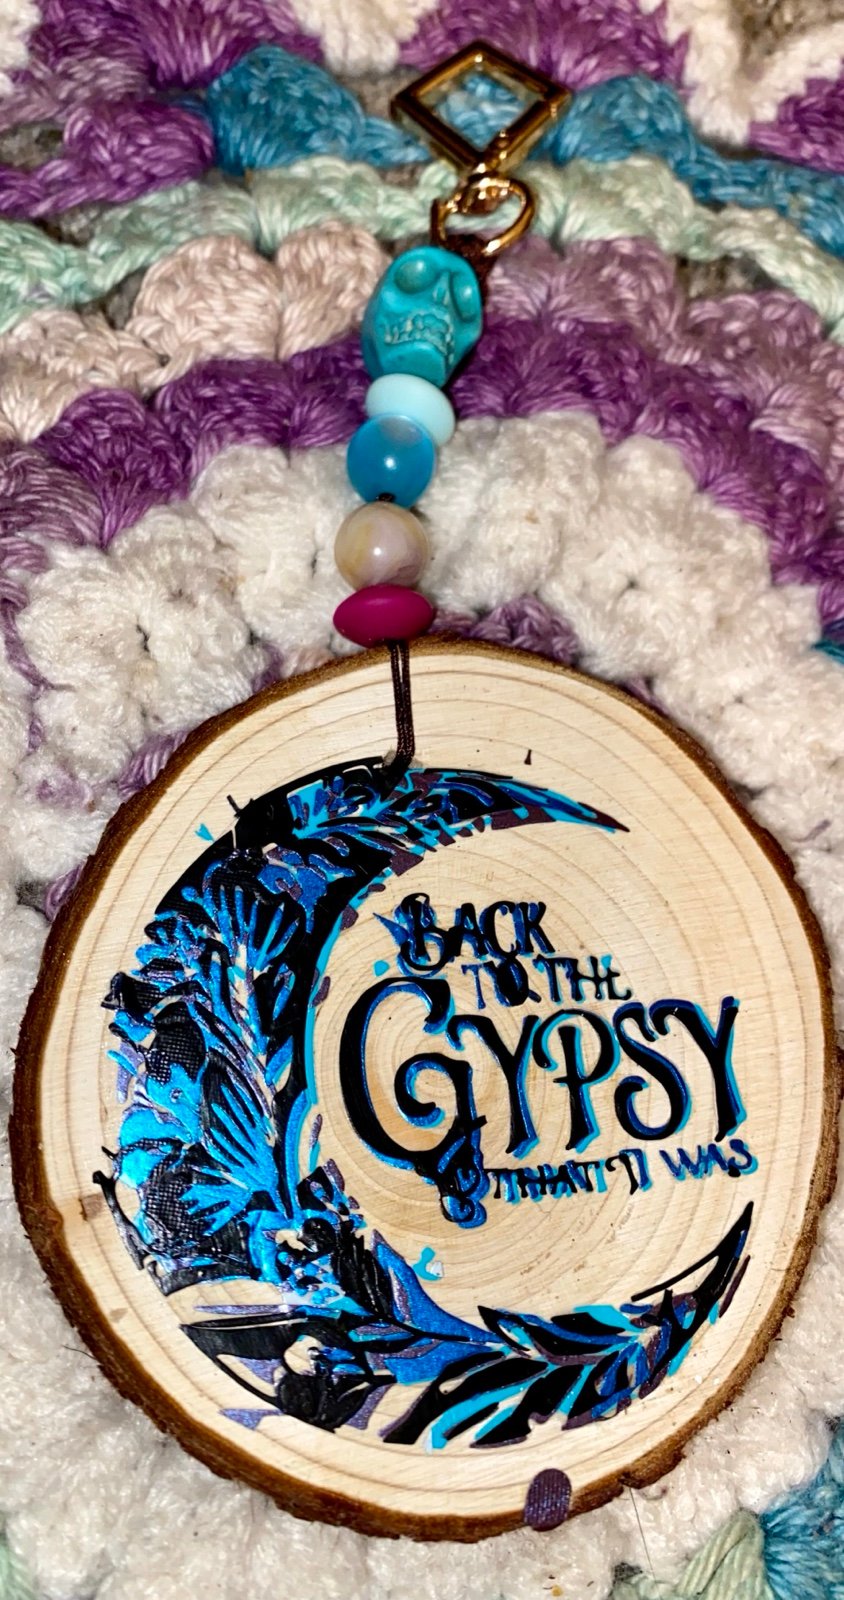 Back to the gypsy that I was Stevie Nicks wood slice sign with turquoise skull e4VHYz7IV